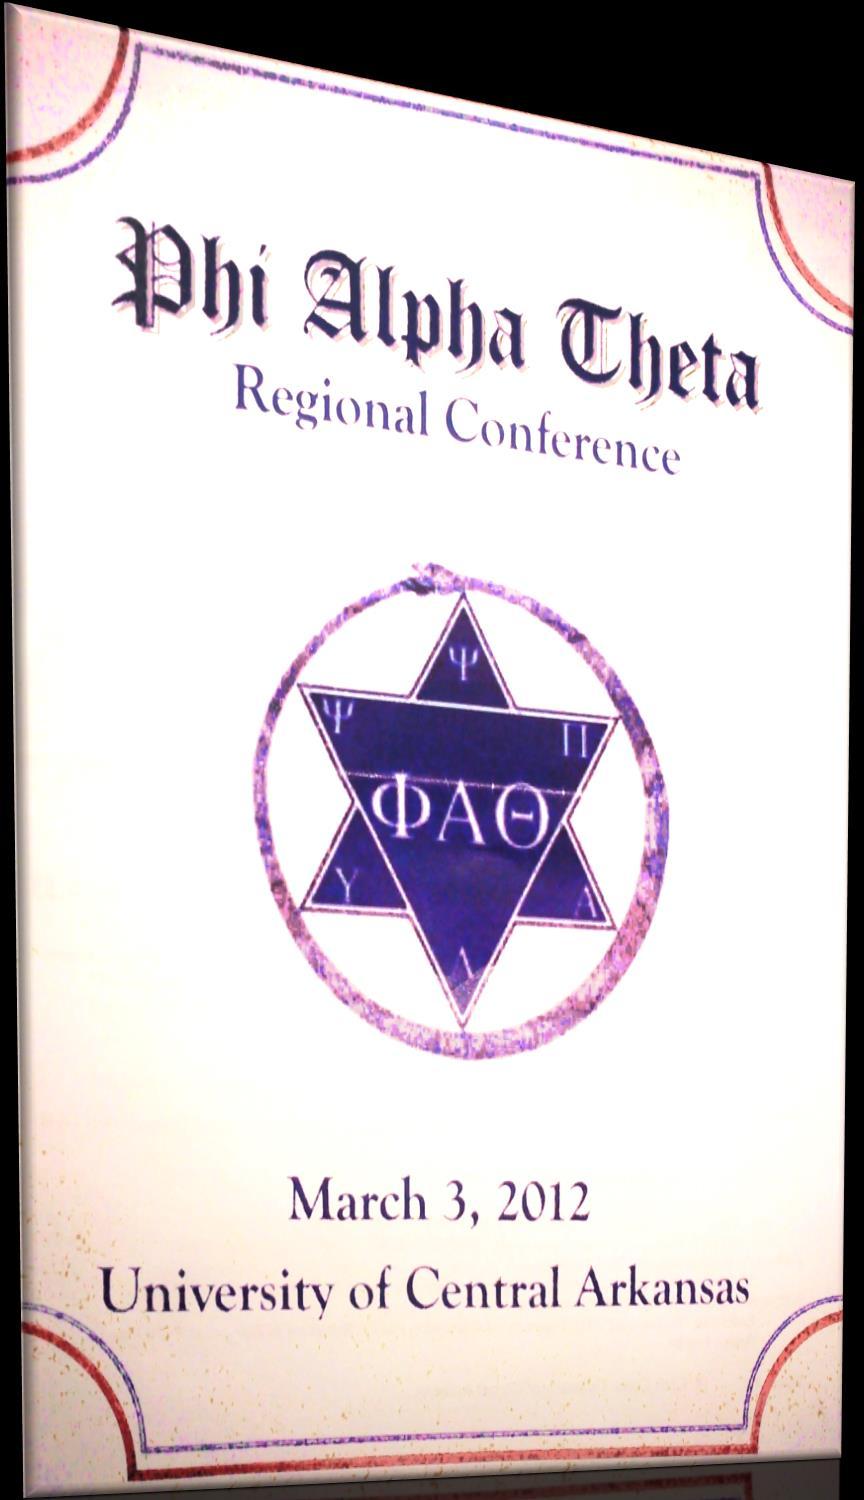 The University of Central Arkansas was honored to host the Phi Alpha Theta 2012 Regional Conference. The Mu Chapter faculty advisors, Dr.